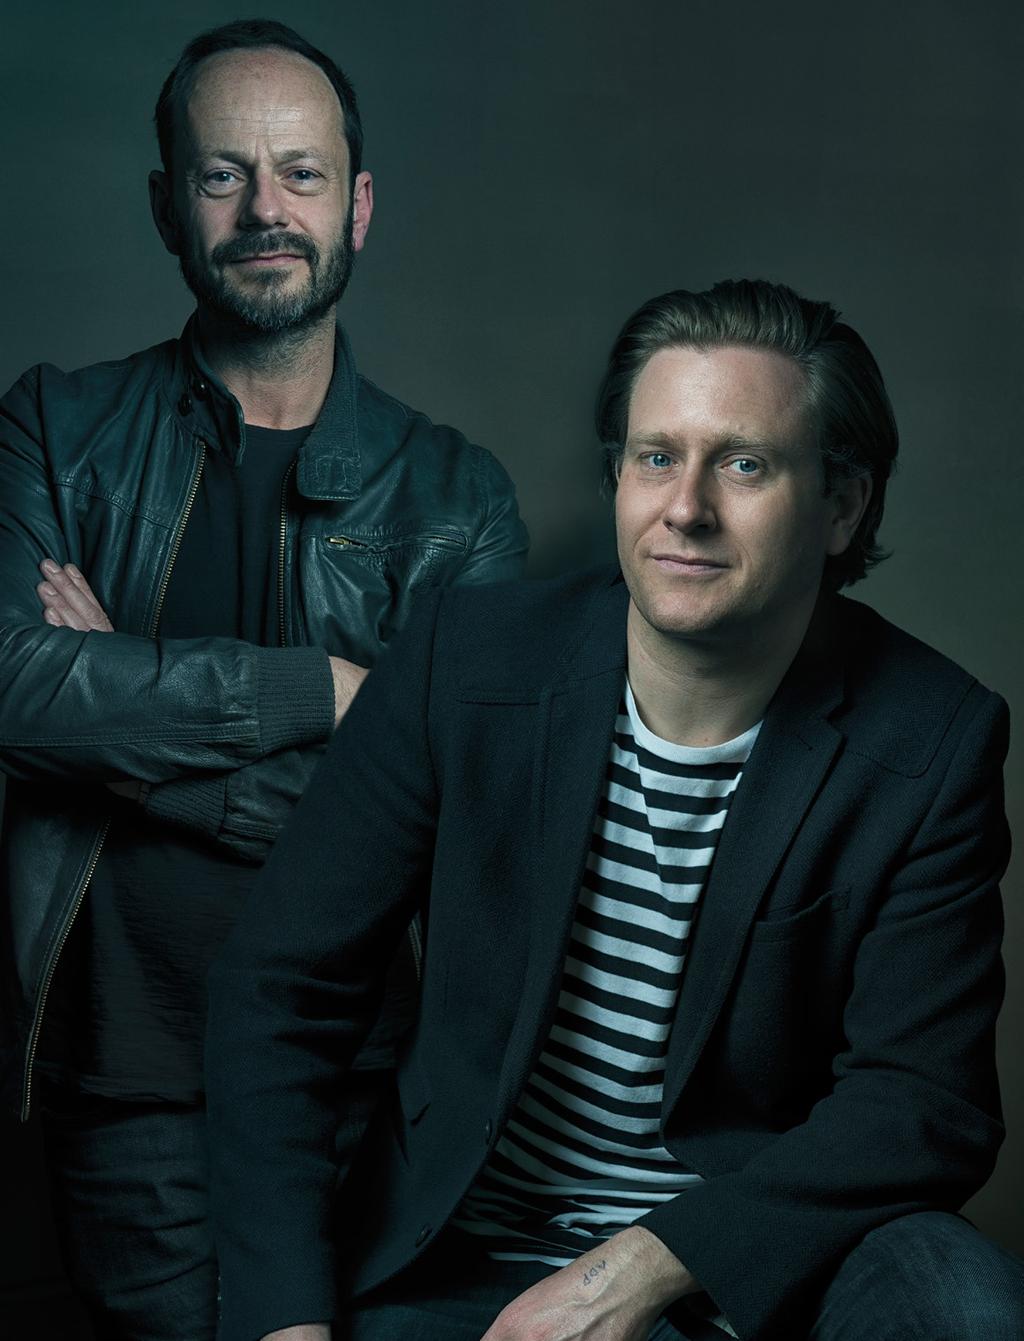 DESIGN & DIGITAL AGENCY James Glover & Andrew Bowyer Creative director and digital director of Fluid Tell us a bit about the company: Fluid is a creative agency that works with entertainment brands